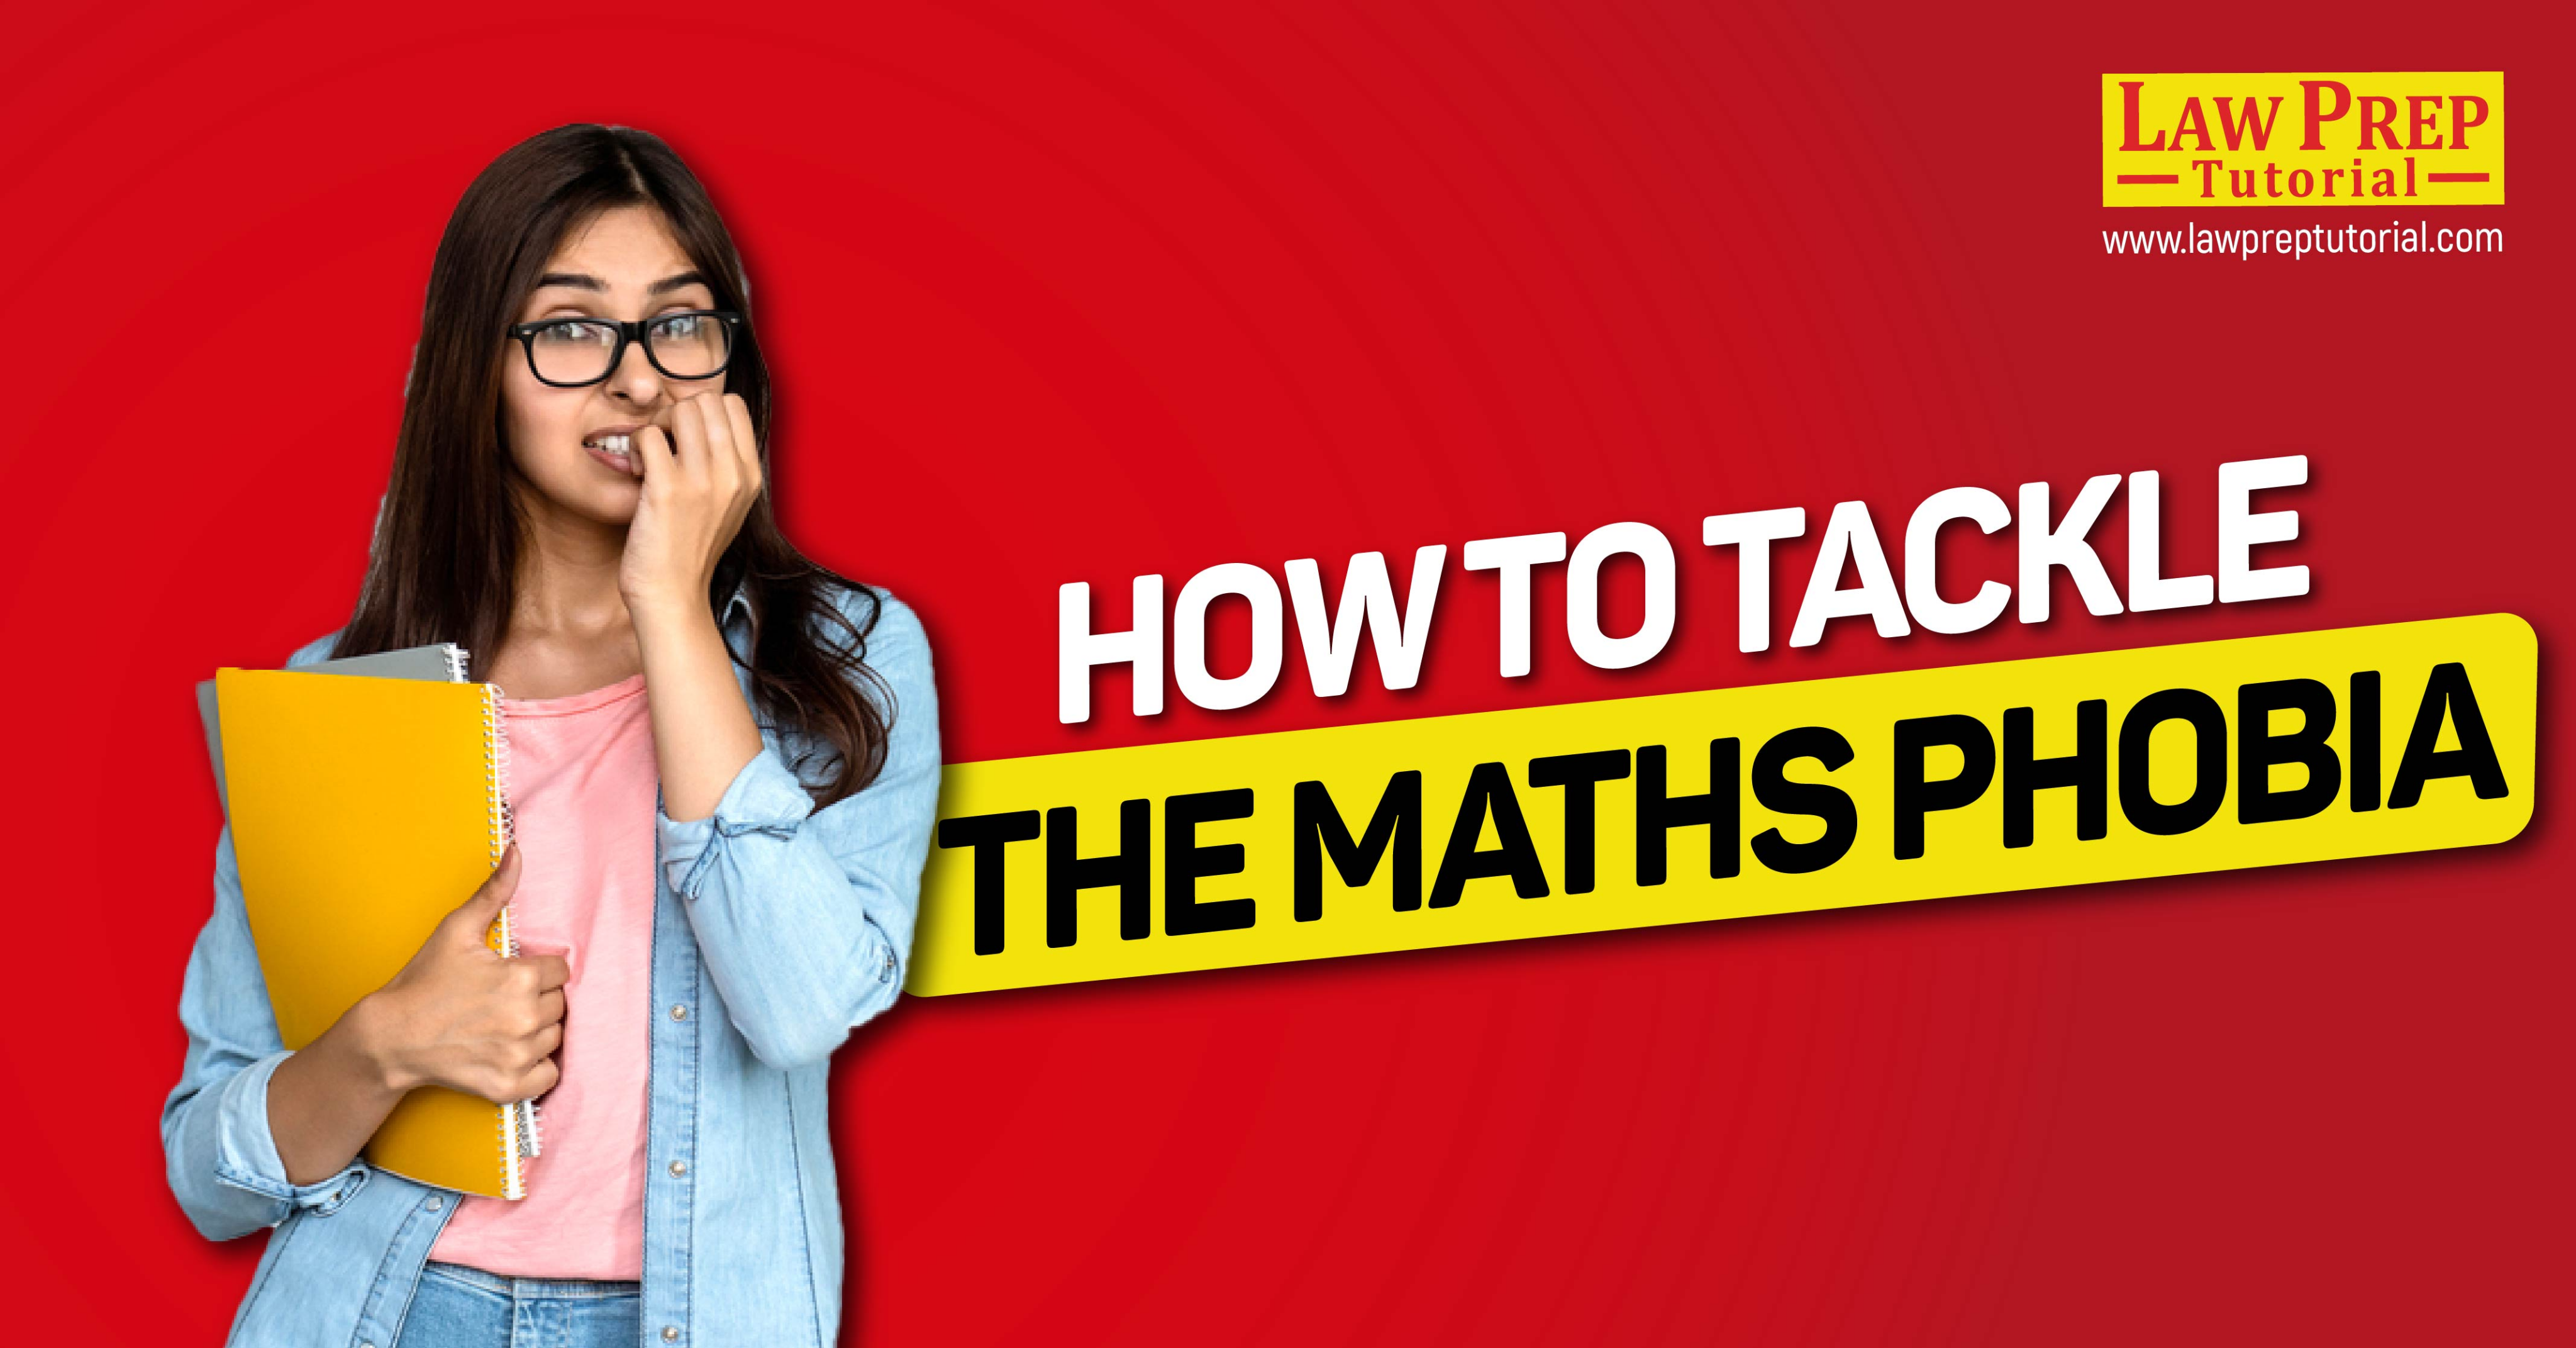 How to Tackle The Maths Phobia